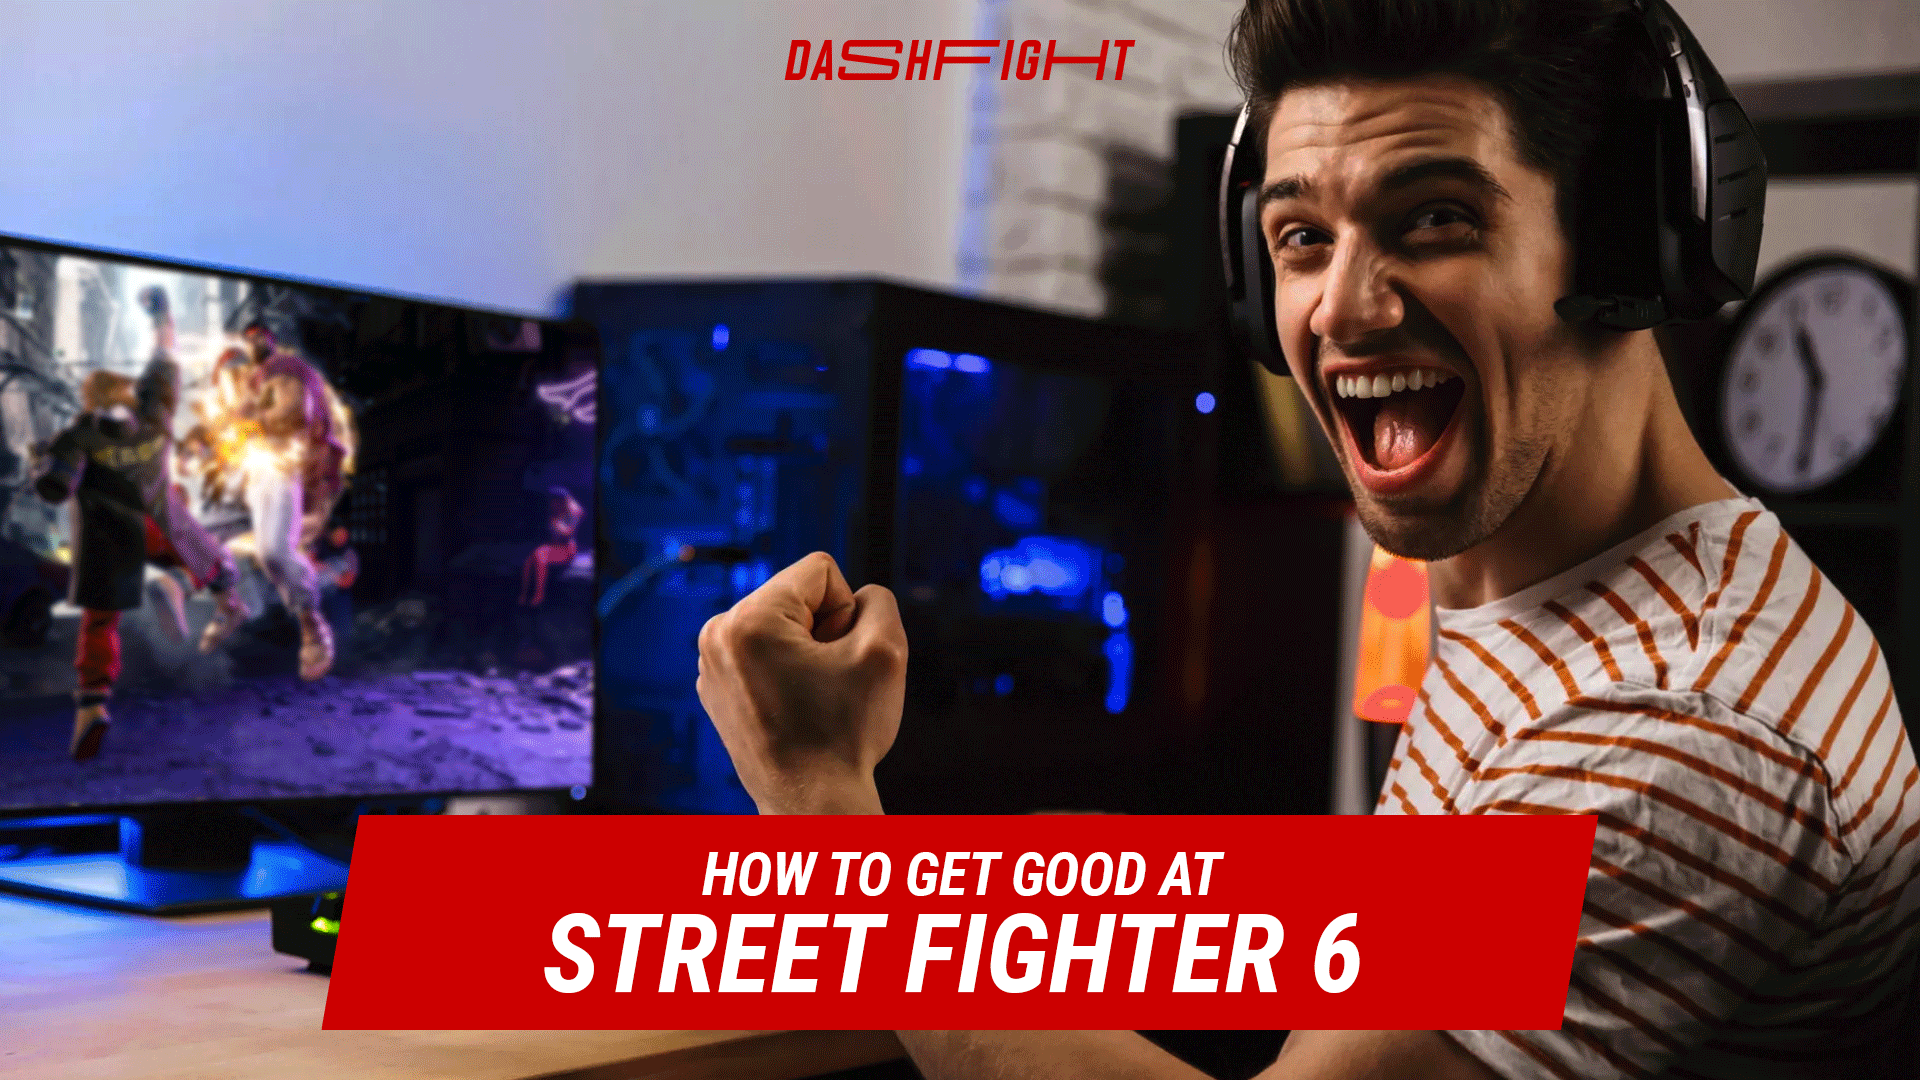 Get Ready For Battle - Street Fighter: Duel Is Going Worldwide